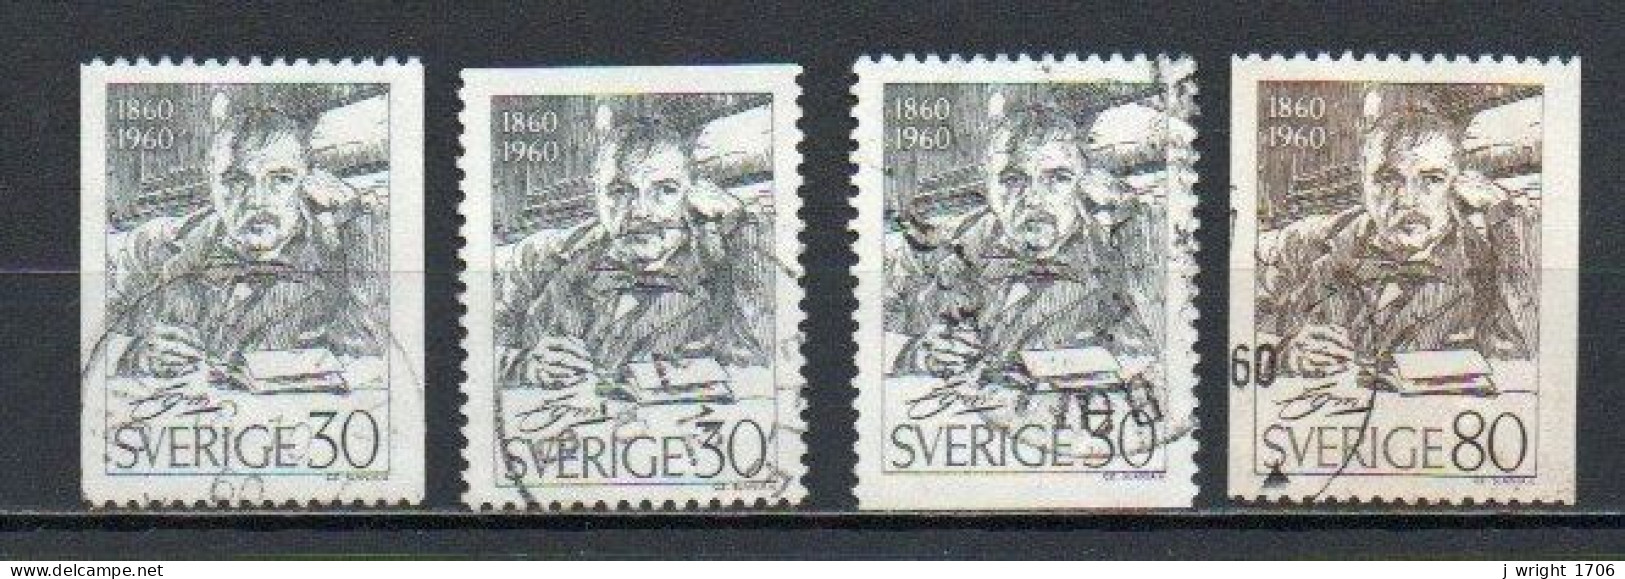 Sweden, 1960, Anders Zorn, Set, USED - Used Stamps